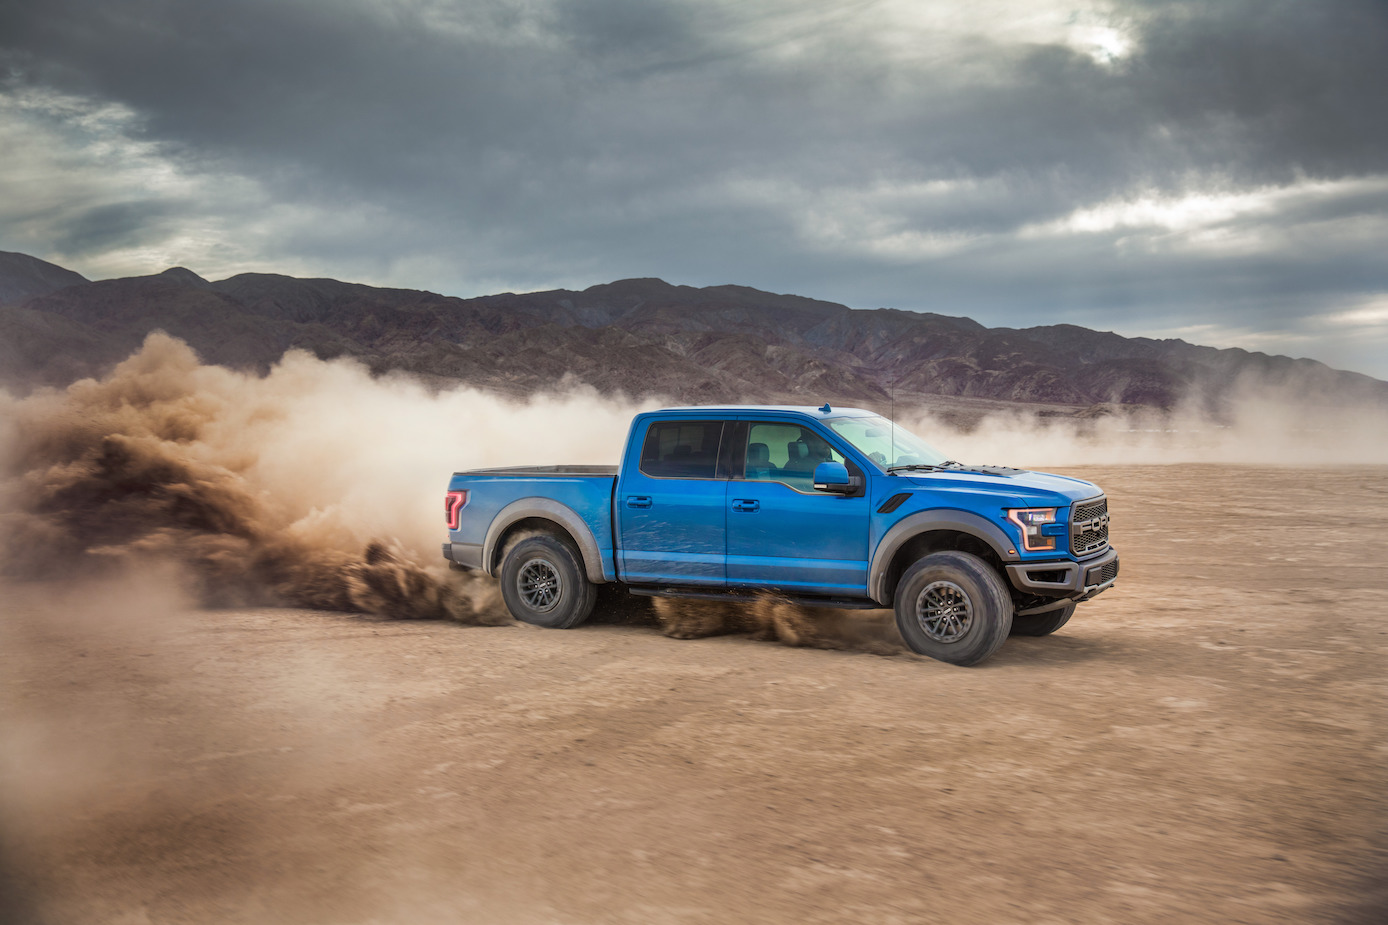 The 2020 Ford F-150 in blue driving on a dusty road. This 2020 used truck offers great value